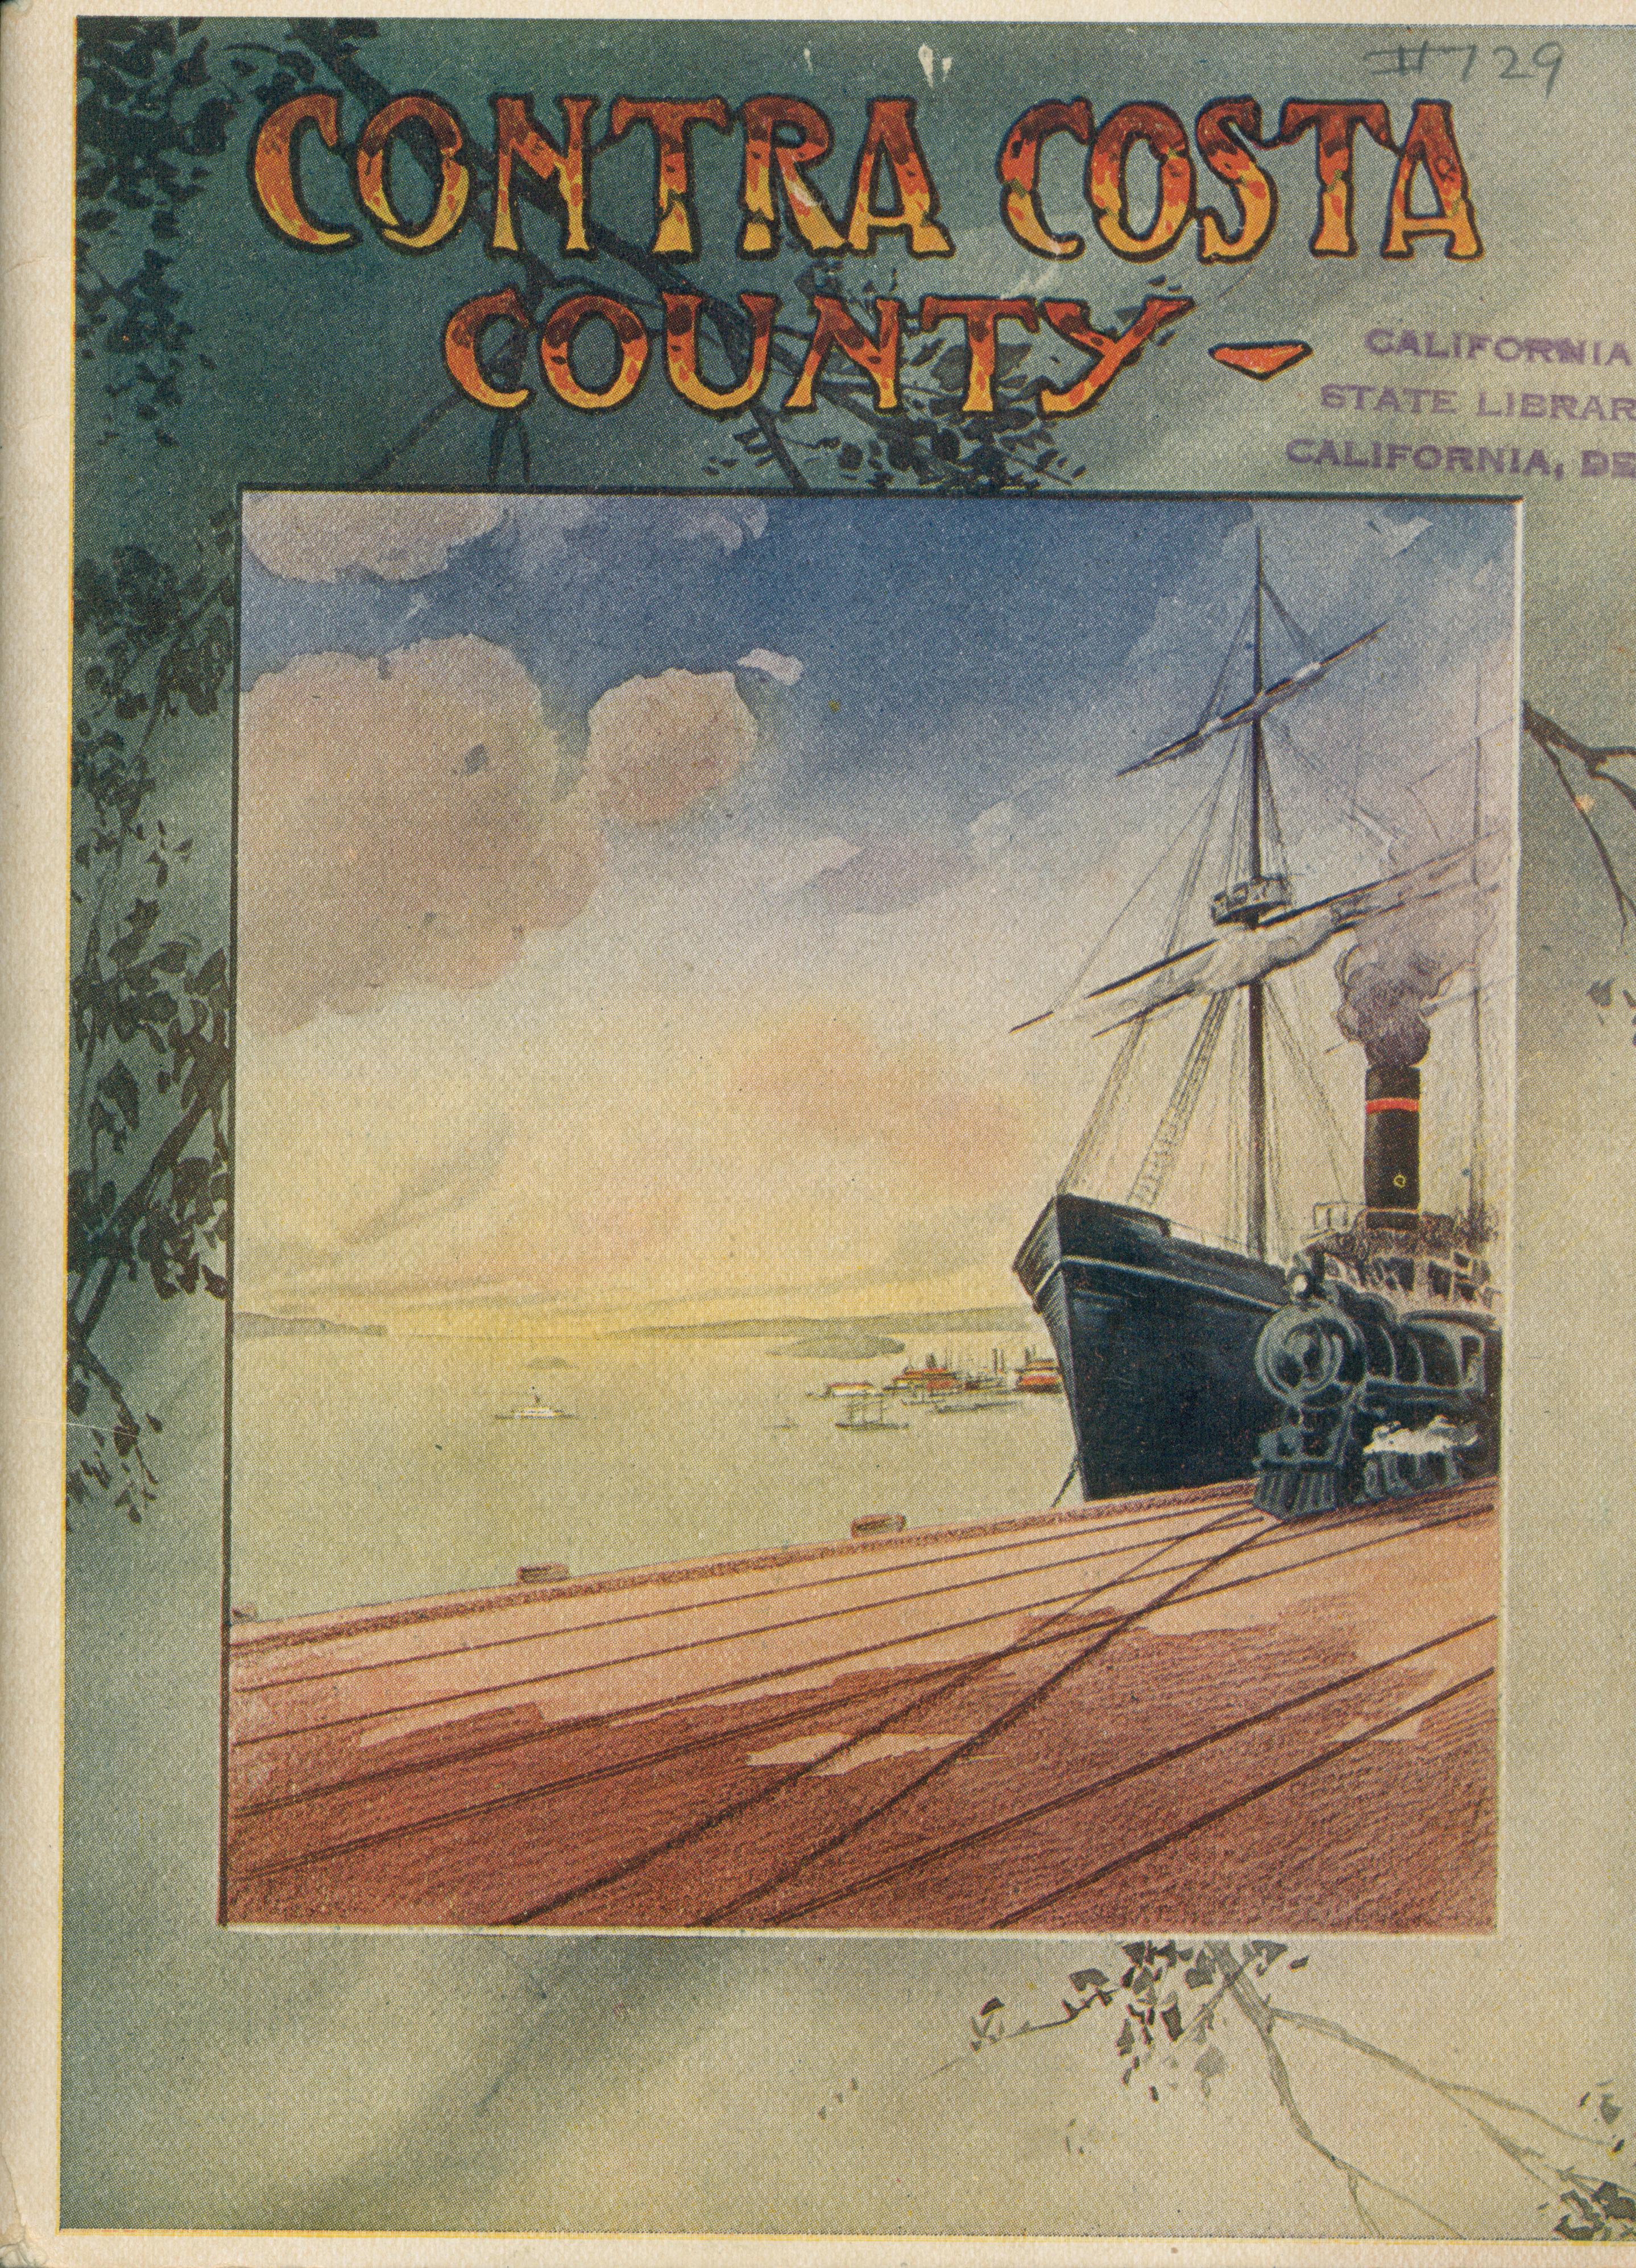 Front shows a dock with a train pulling alongside a clipper ship